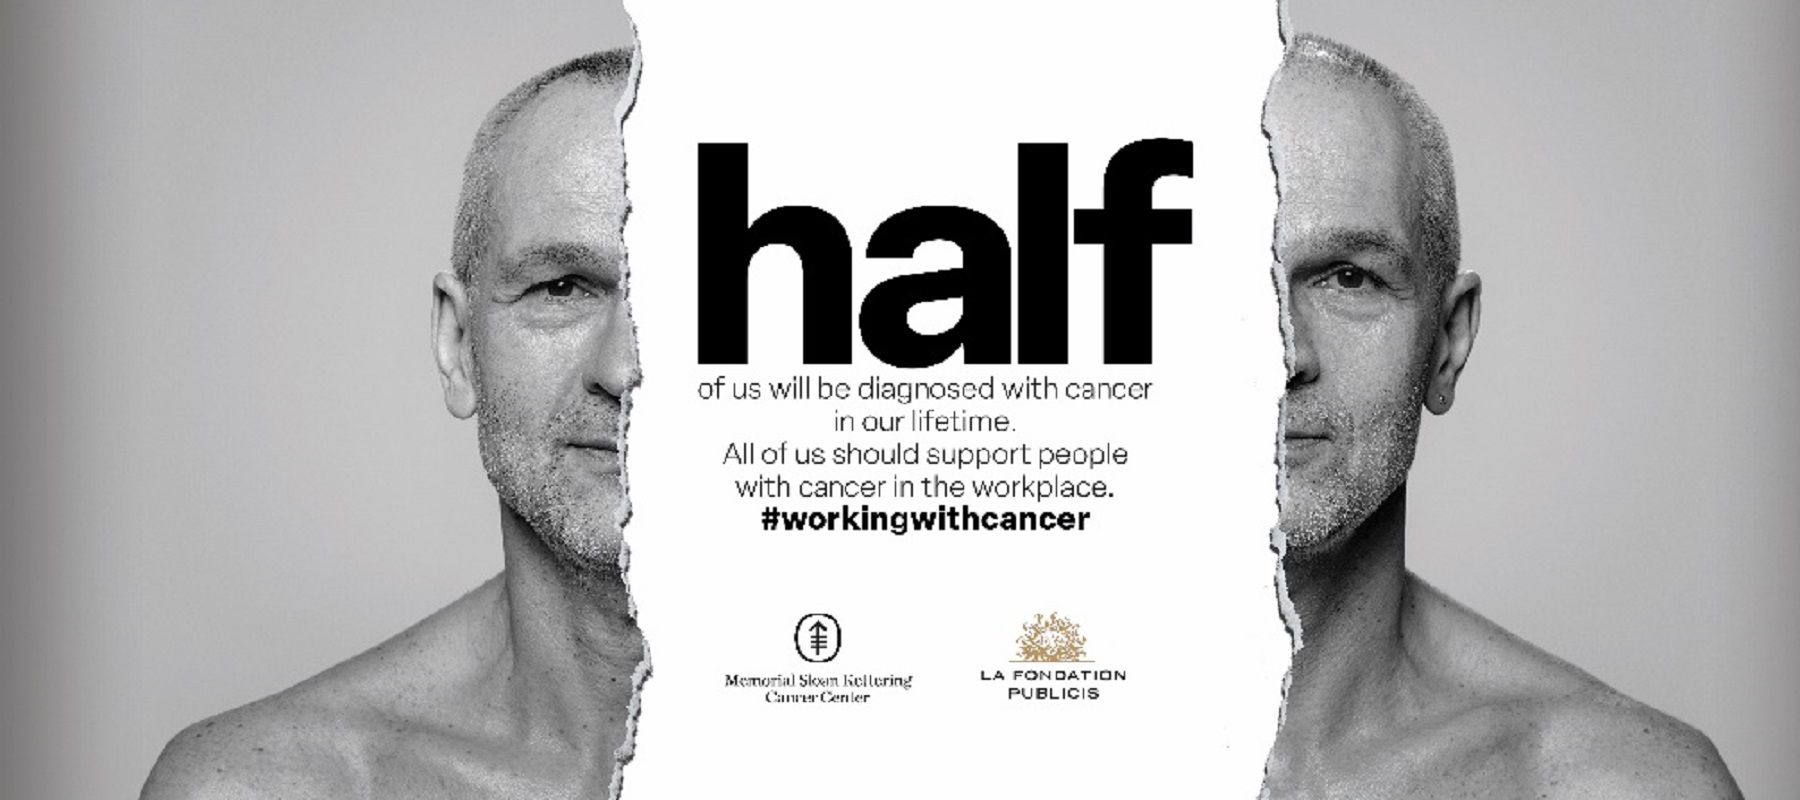 Cannes Lions awards Grand Prix for Good to Working with Cancer